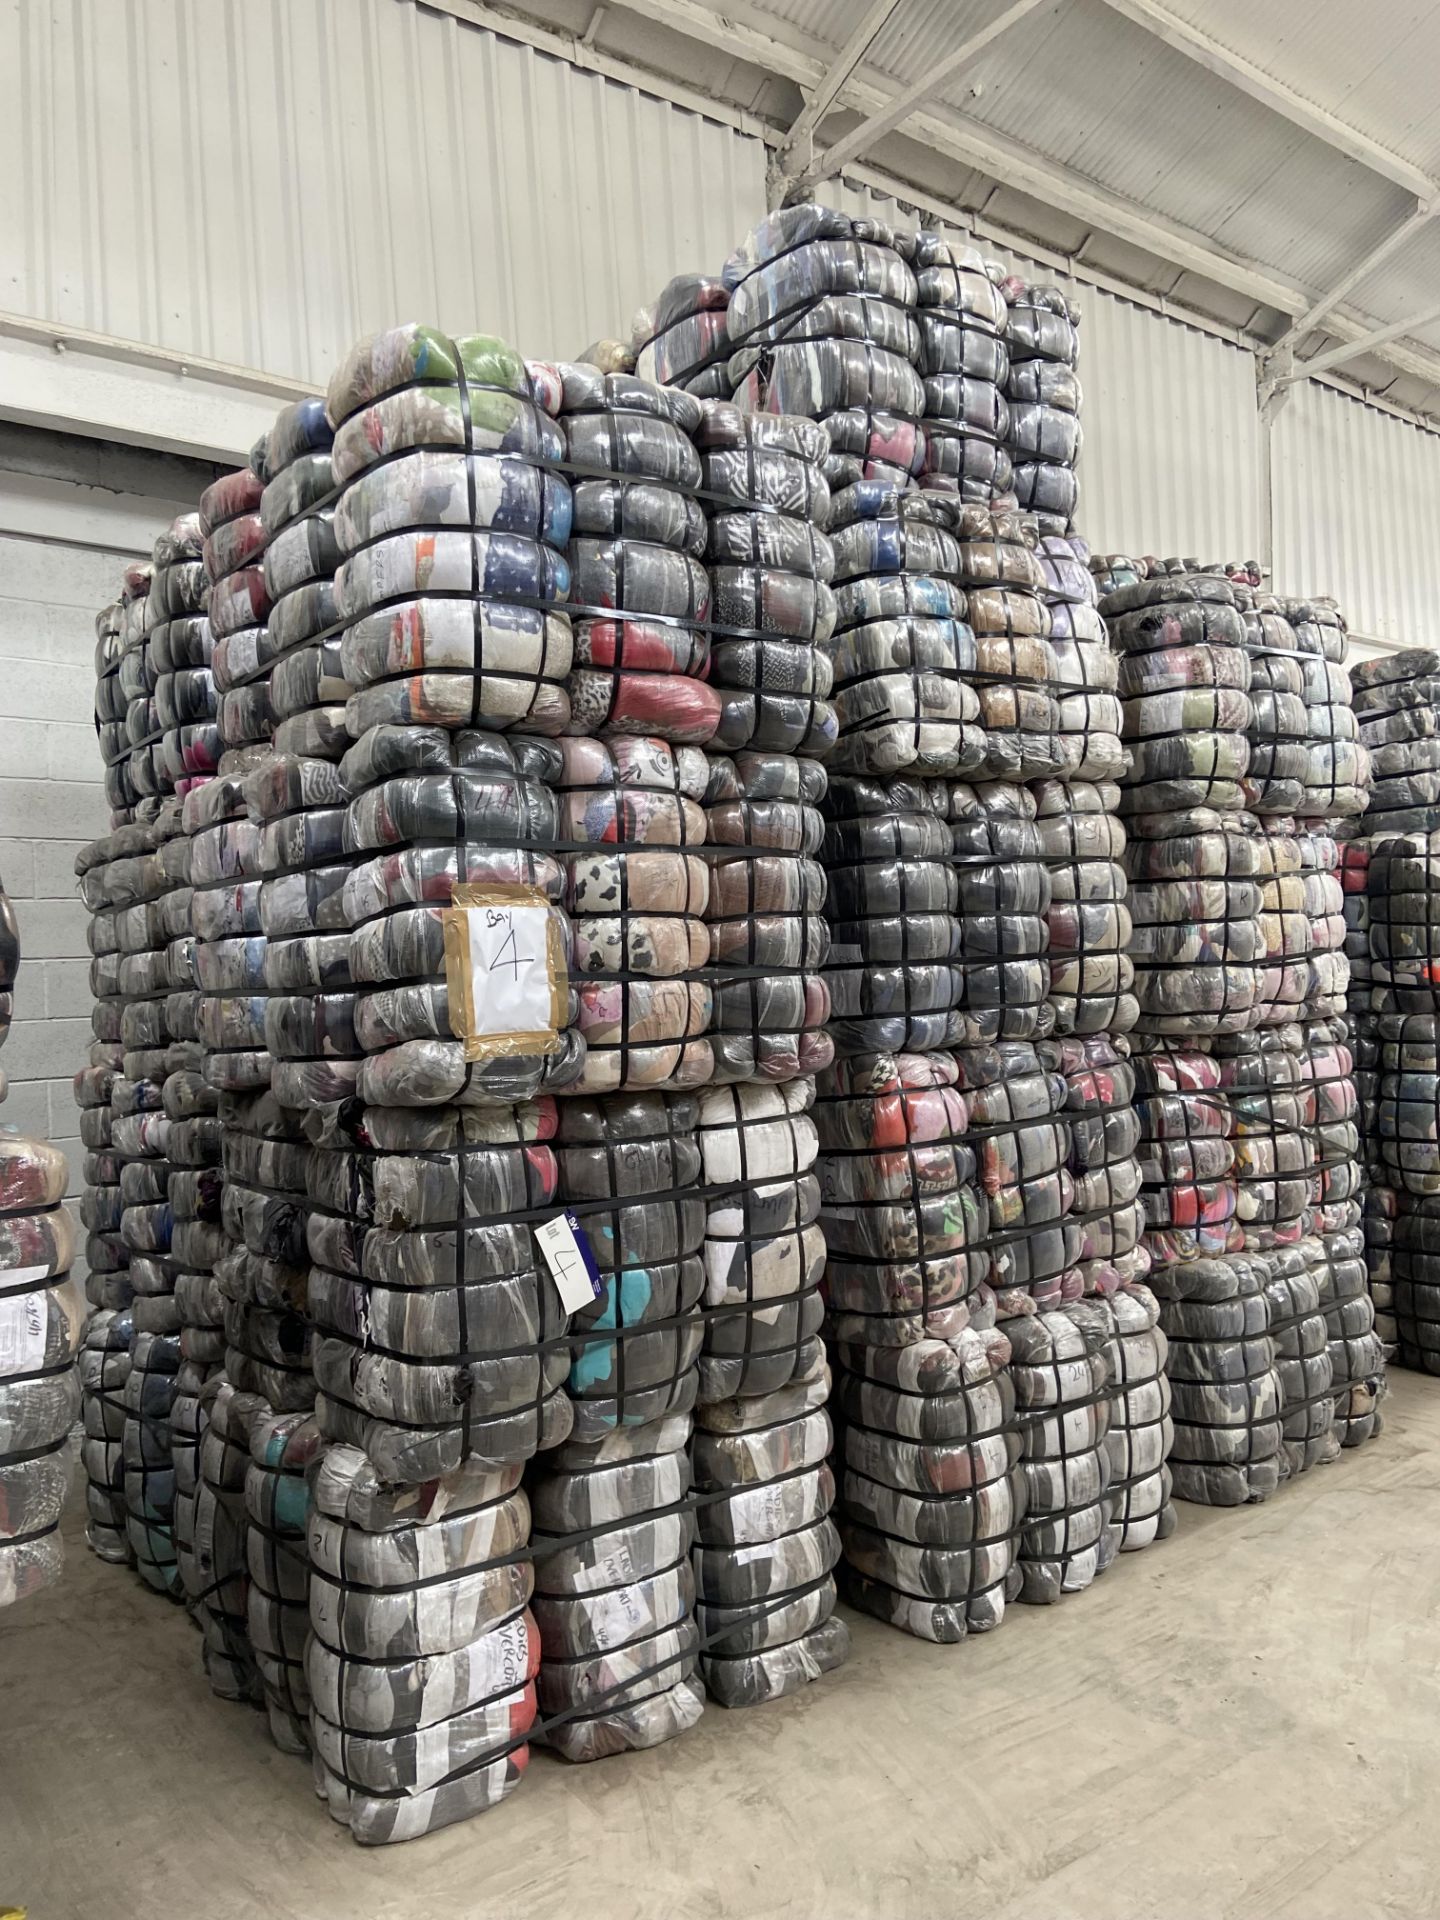 APPROX 197 BALES (8865KG) RECYCLABLE WASTE TEXTILES, understood to comprise: Three bales x 45kg